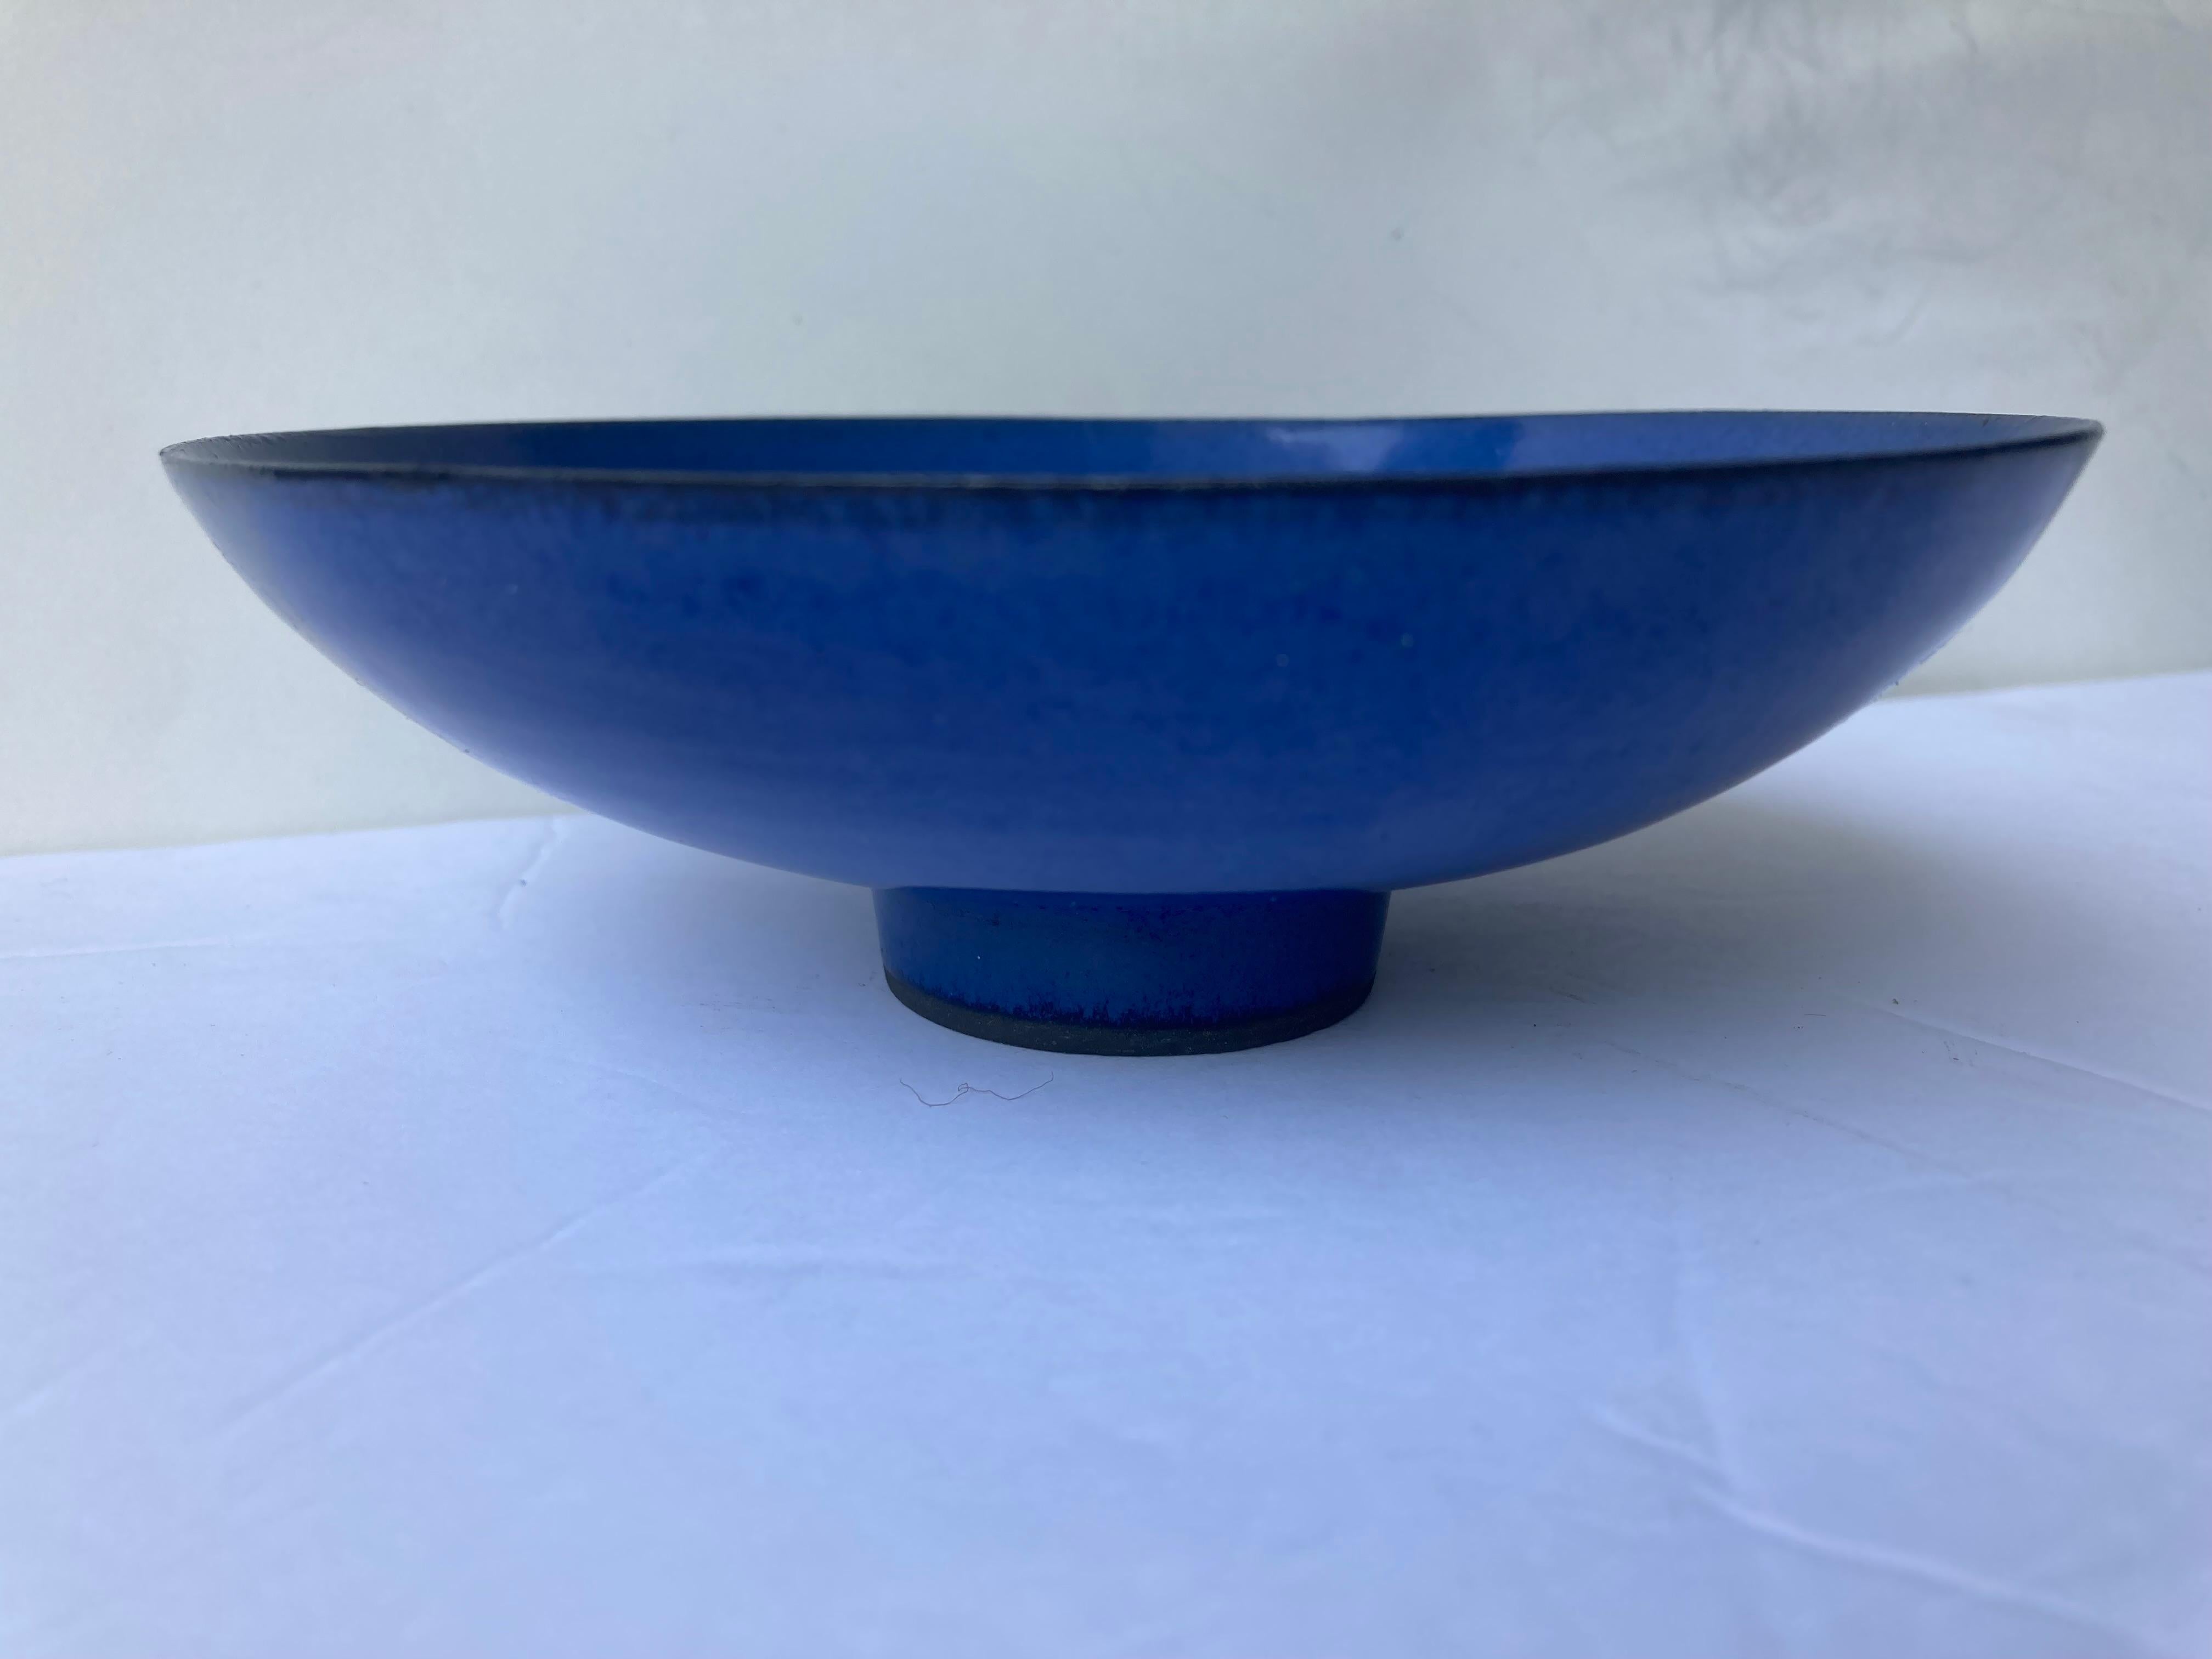 Very thin porcelain footed bowl, by the well known artist James Lovera.